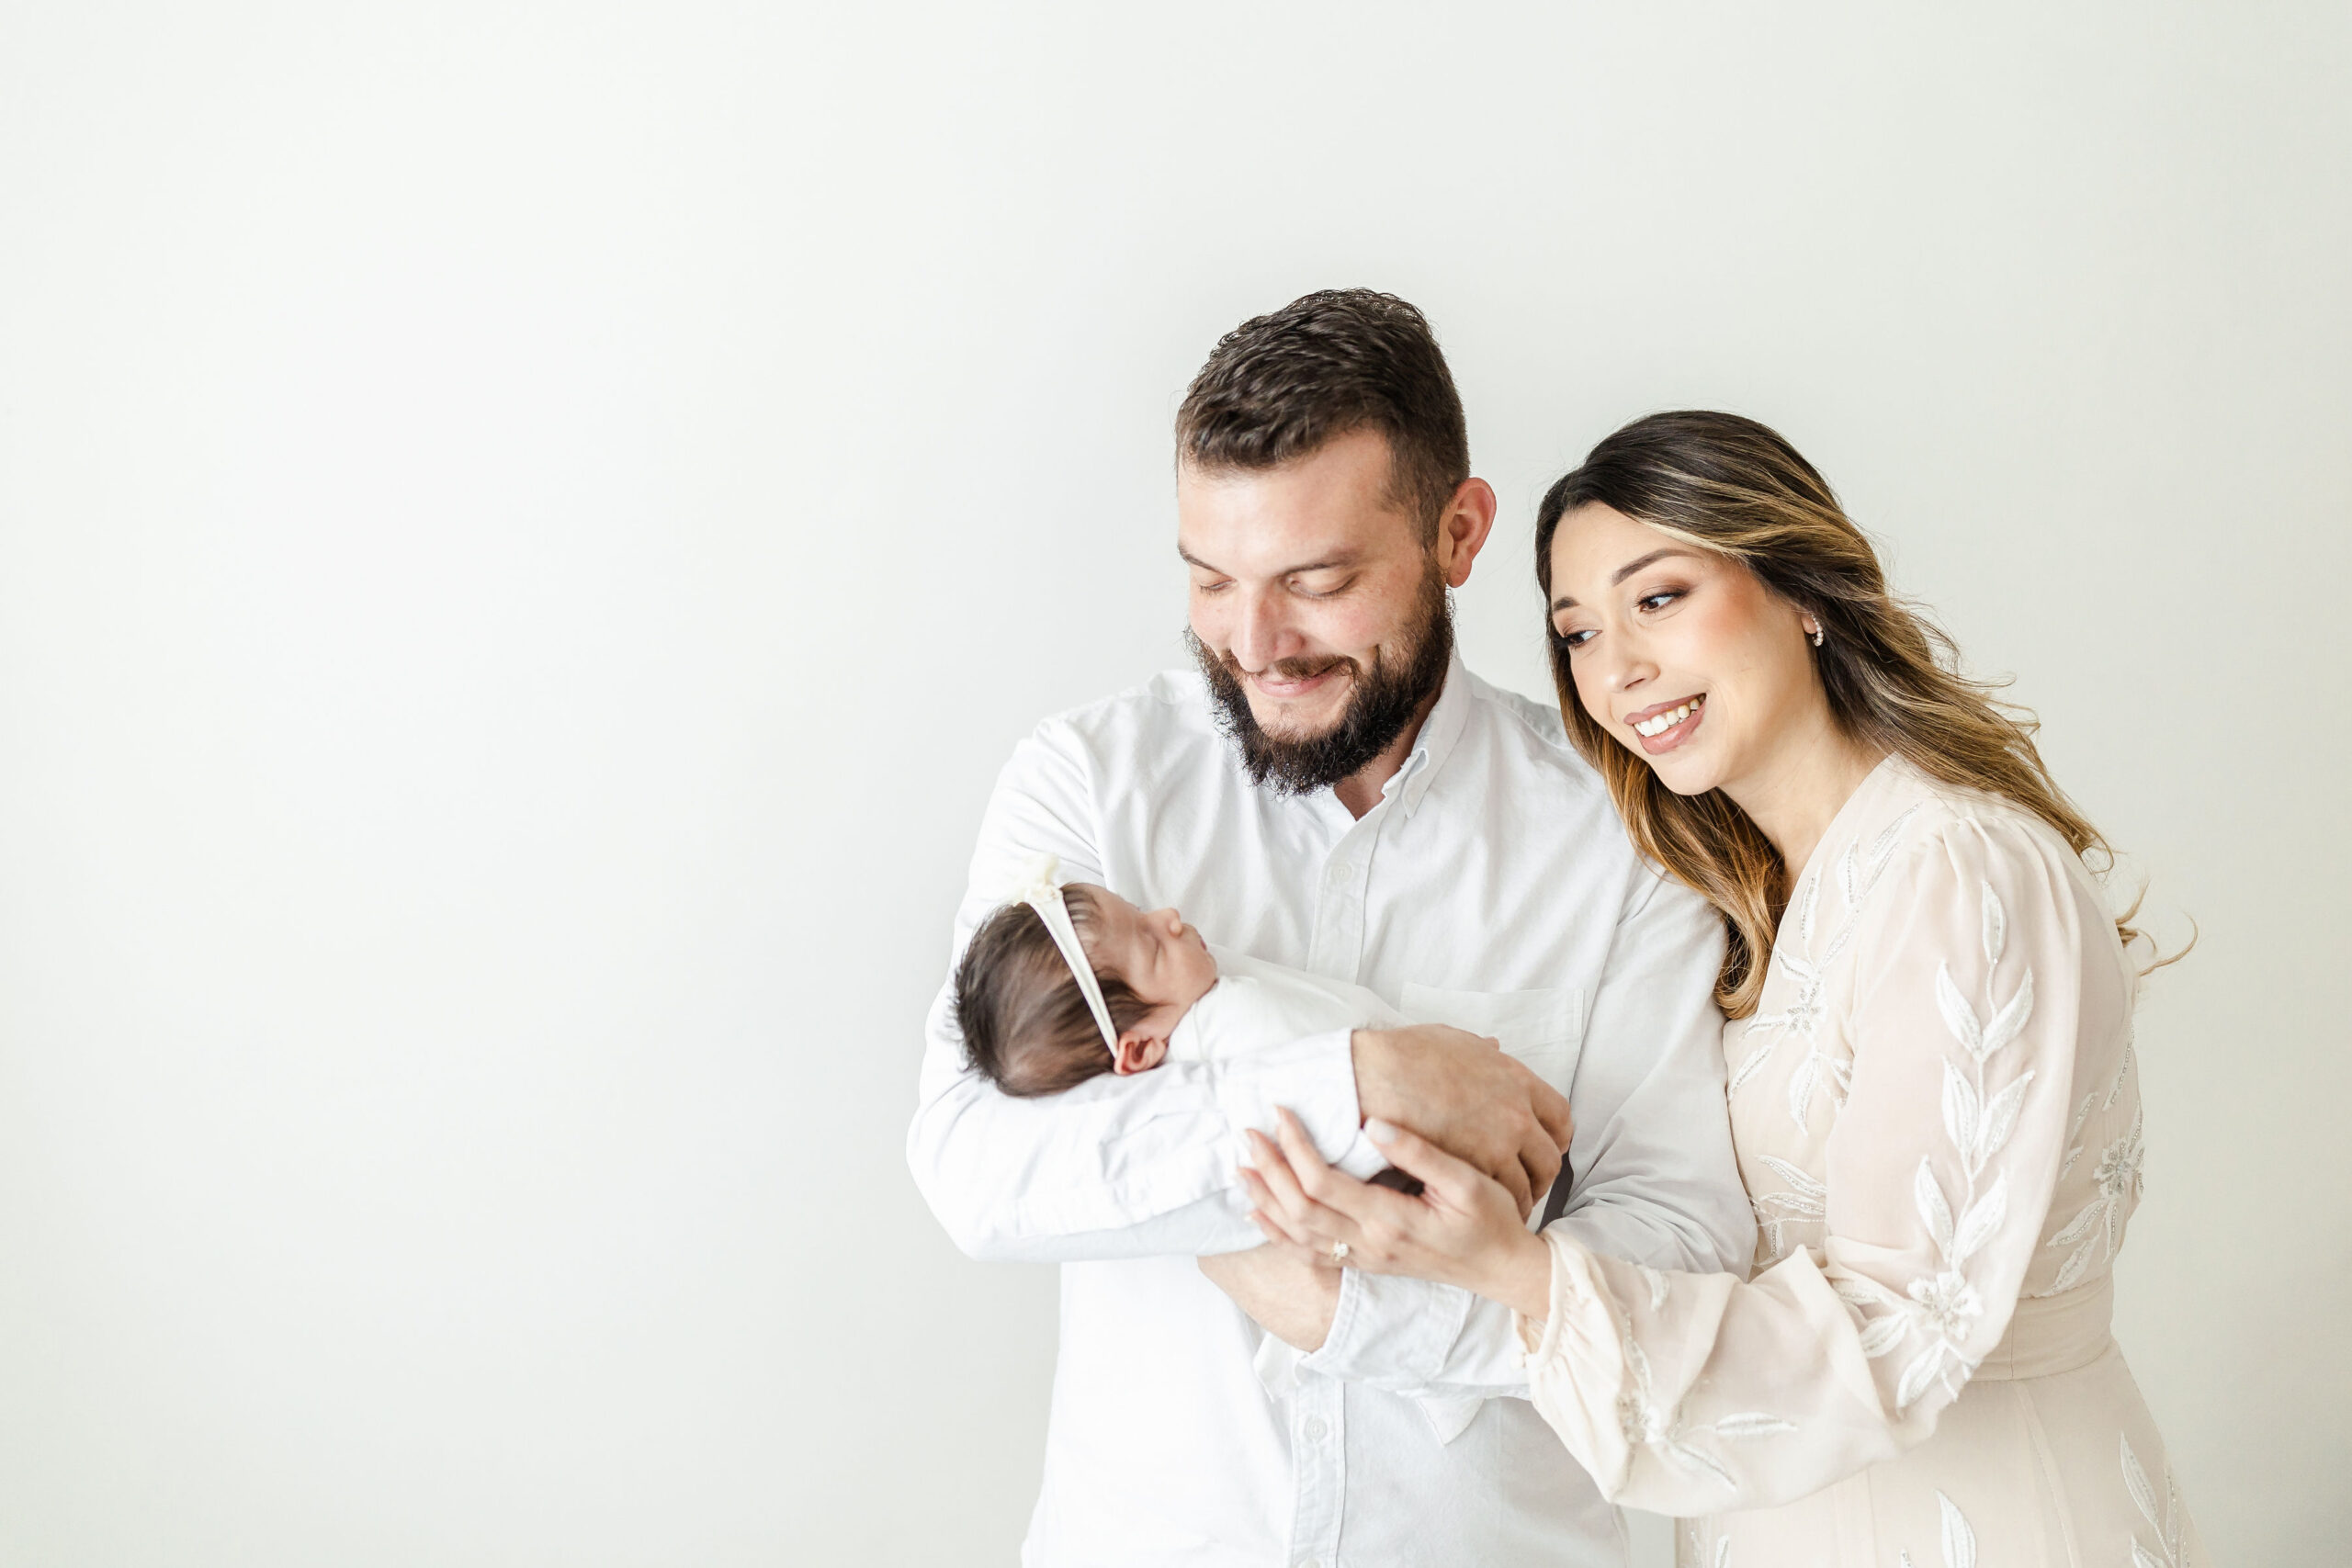 A father and mother looks down at their newborn baby in dad's arms while standing in a studio yoyo boutique